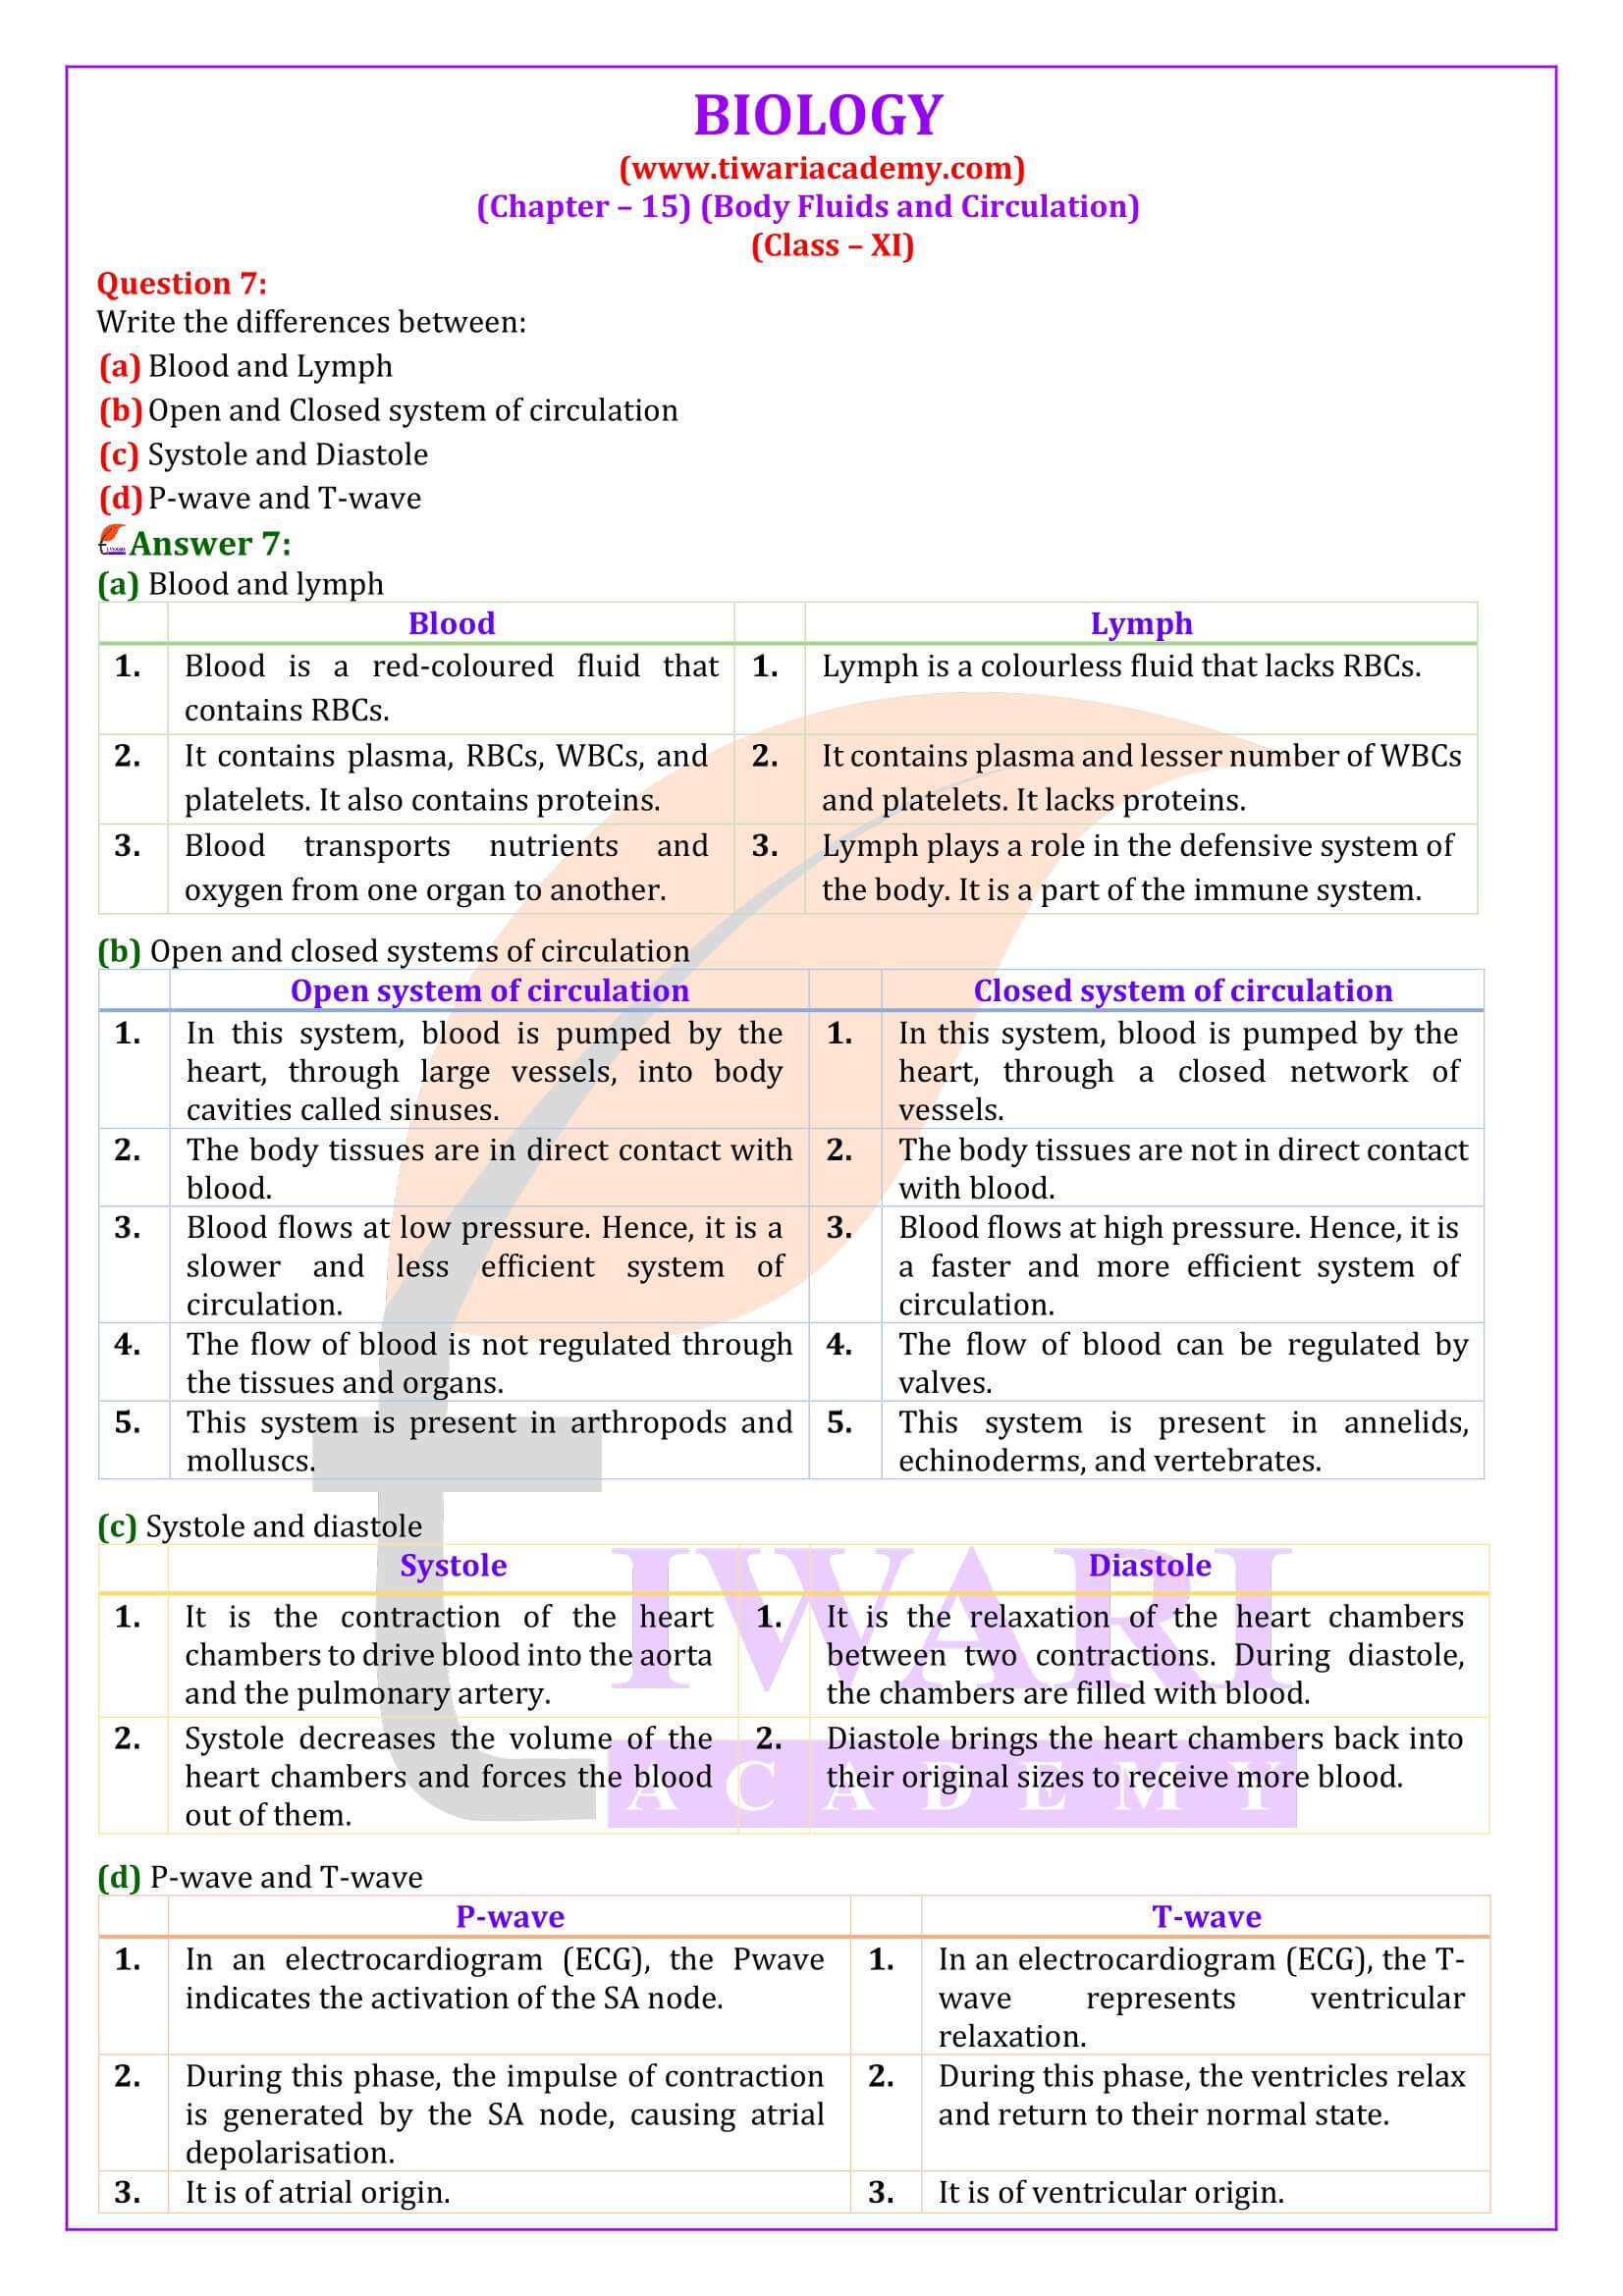 NCERT Solutions for Class 11 Biology Chapter 15 in English Medium